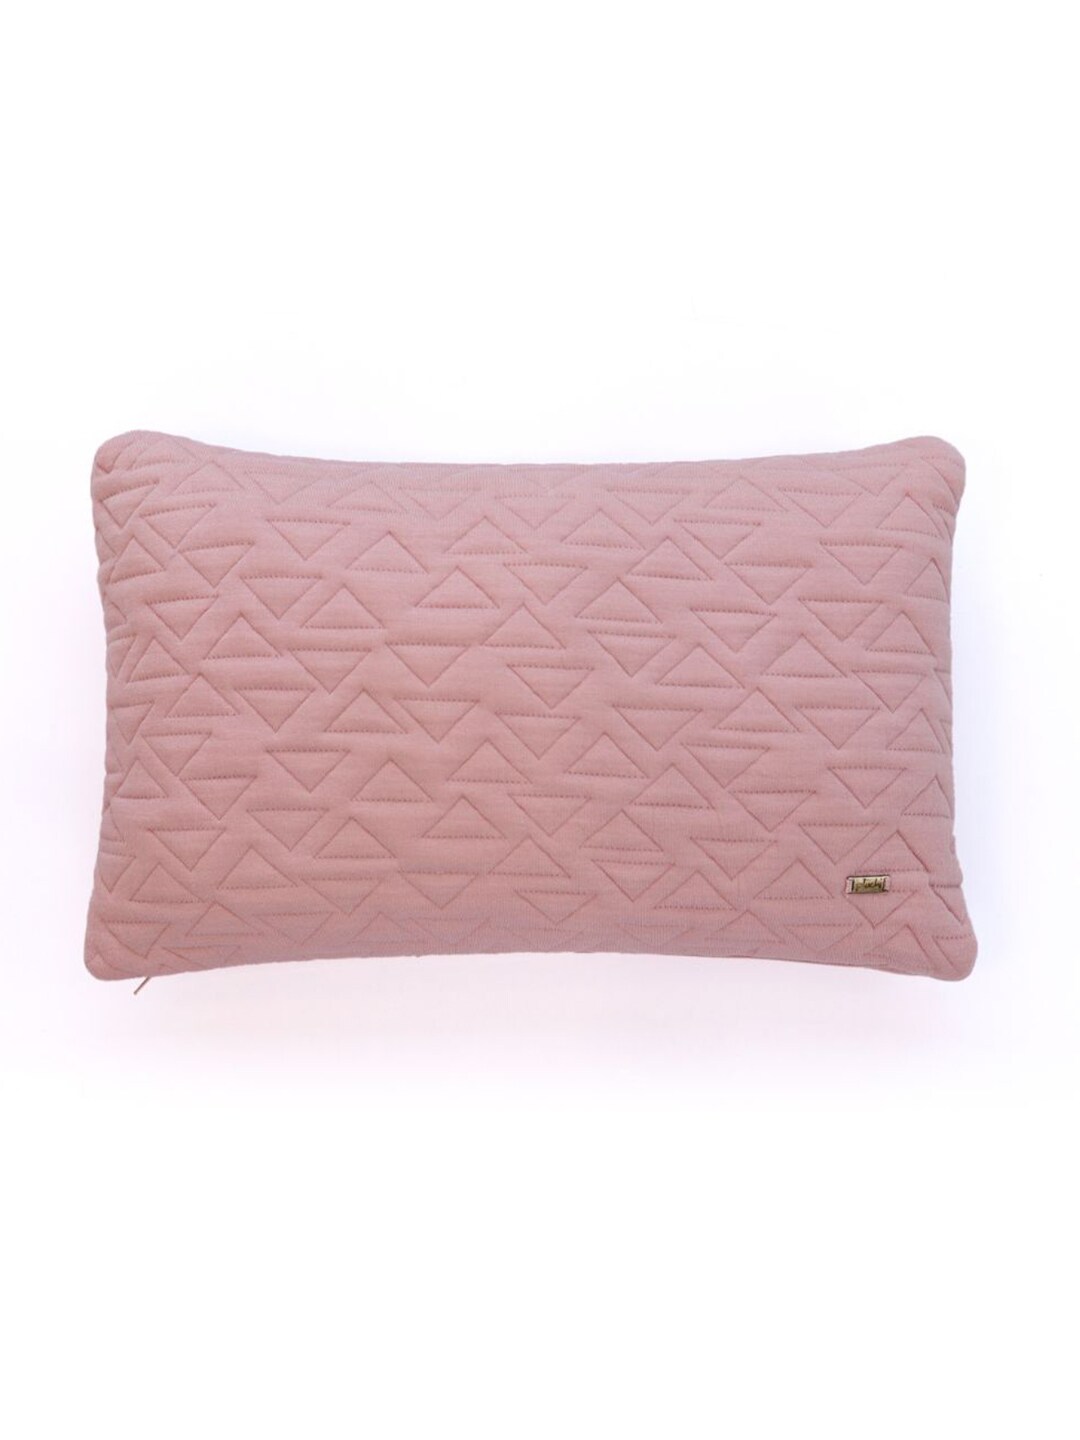 Pluchi Pink Rectangle Cotton Cushion Covers Price in India